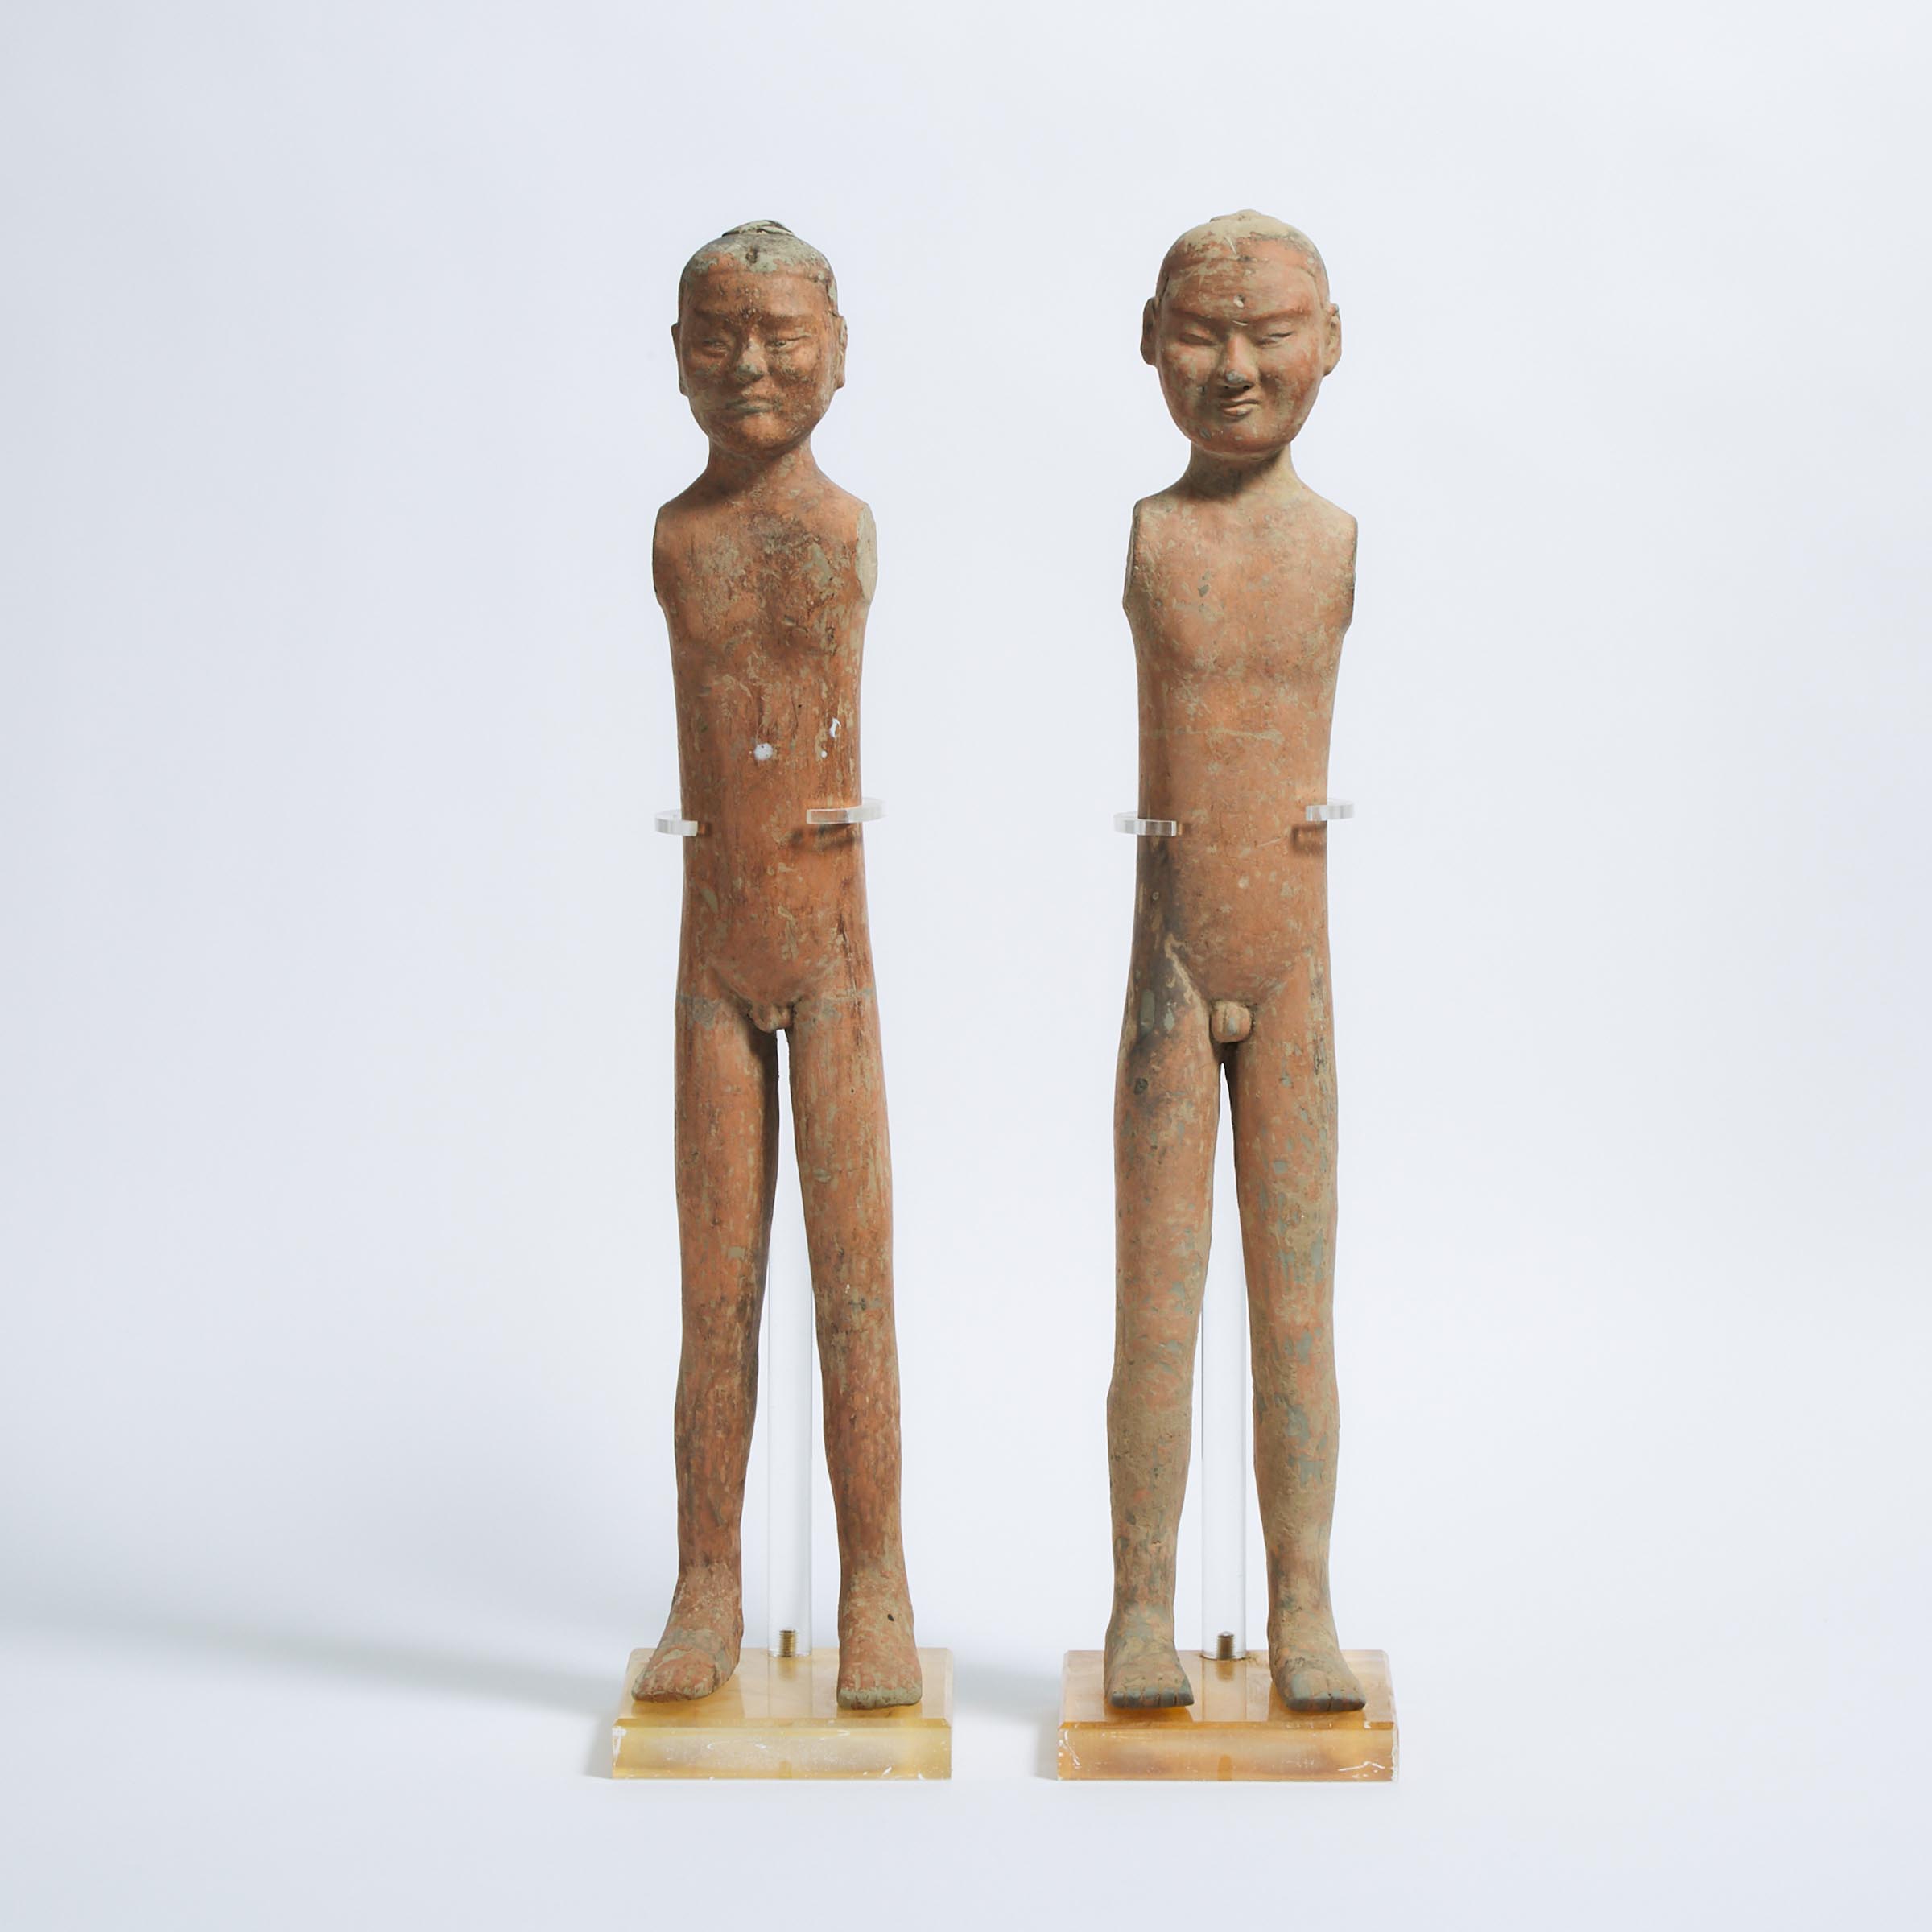 A Pair of Tall Pottery Male Warrior Figures, Han Dynasty (206 BC - AD 220)